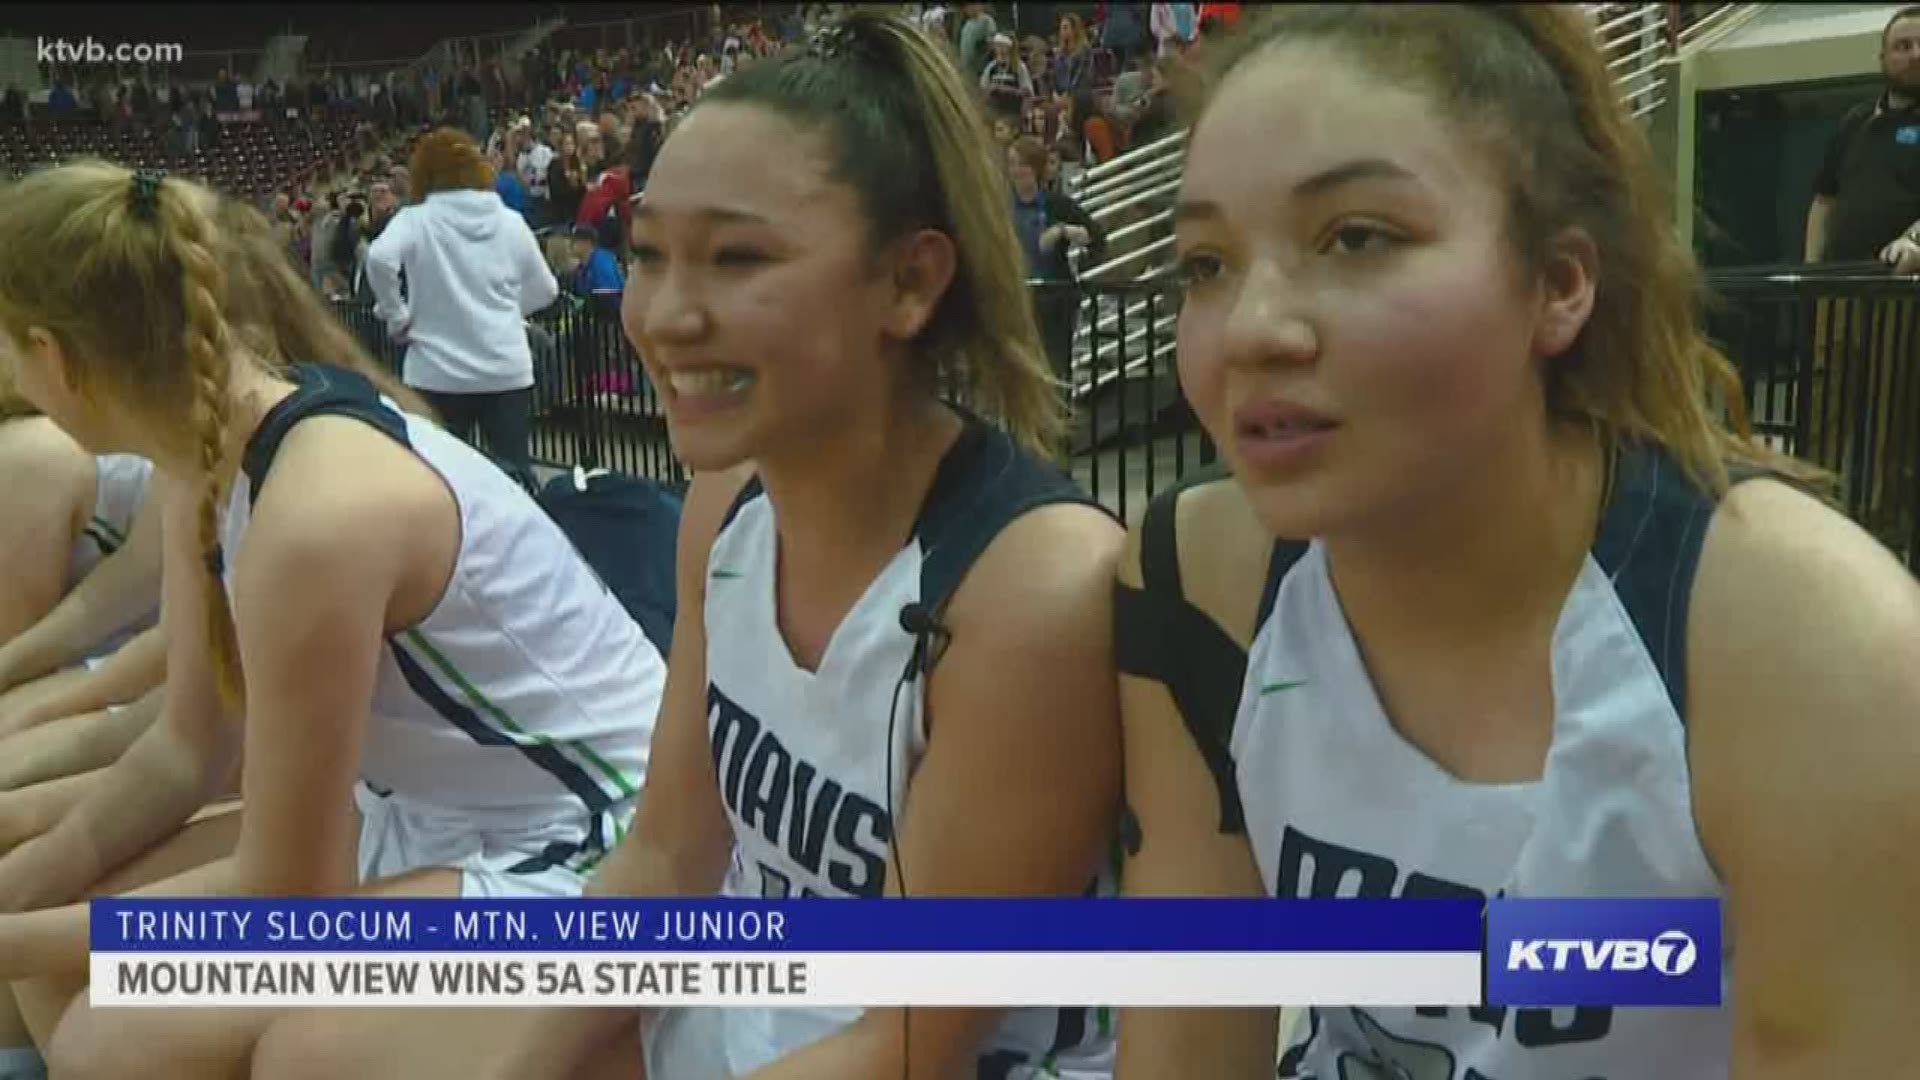 Mountain View vs. Timberline girls 5A state girls basketball championship. The Mavericks win their third 5A state title, 55-49.